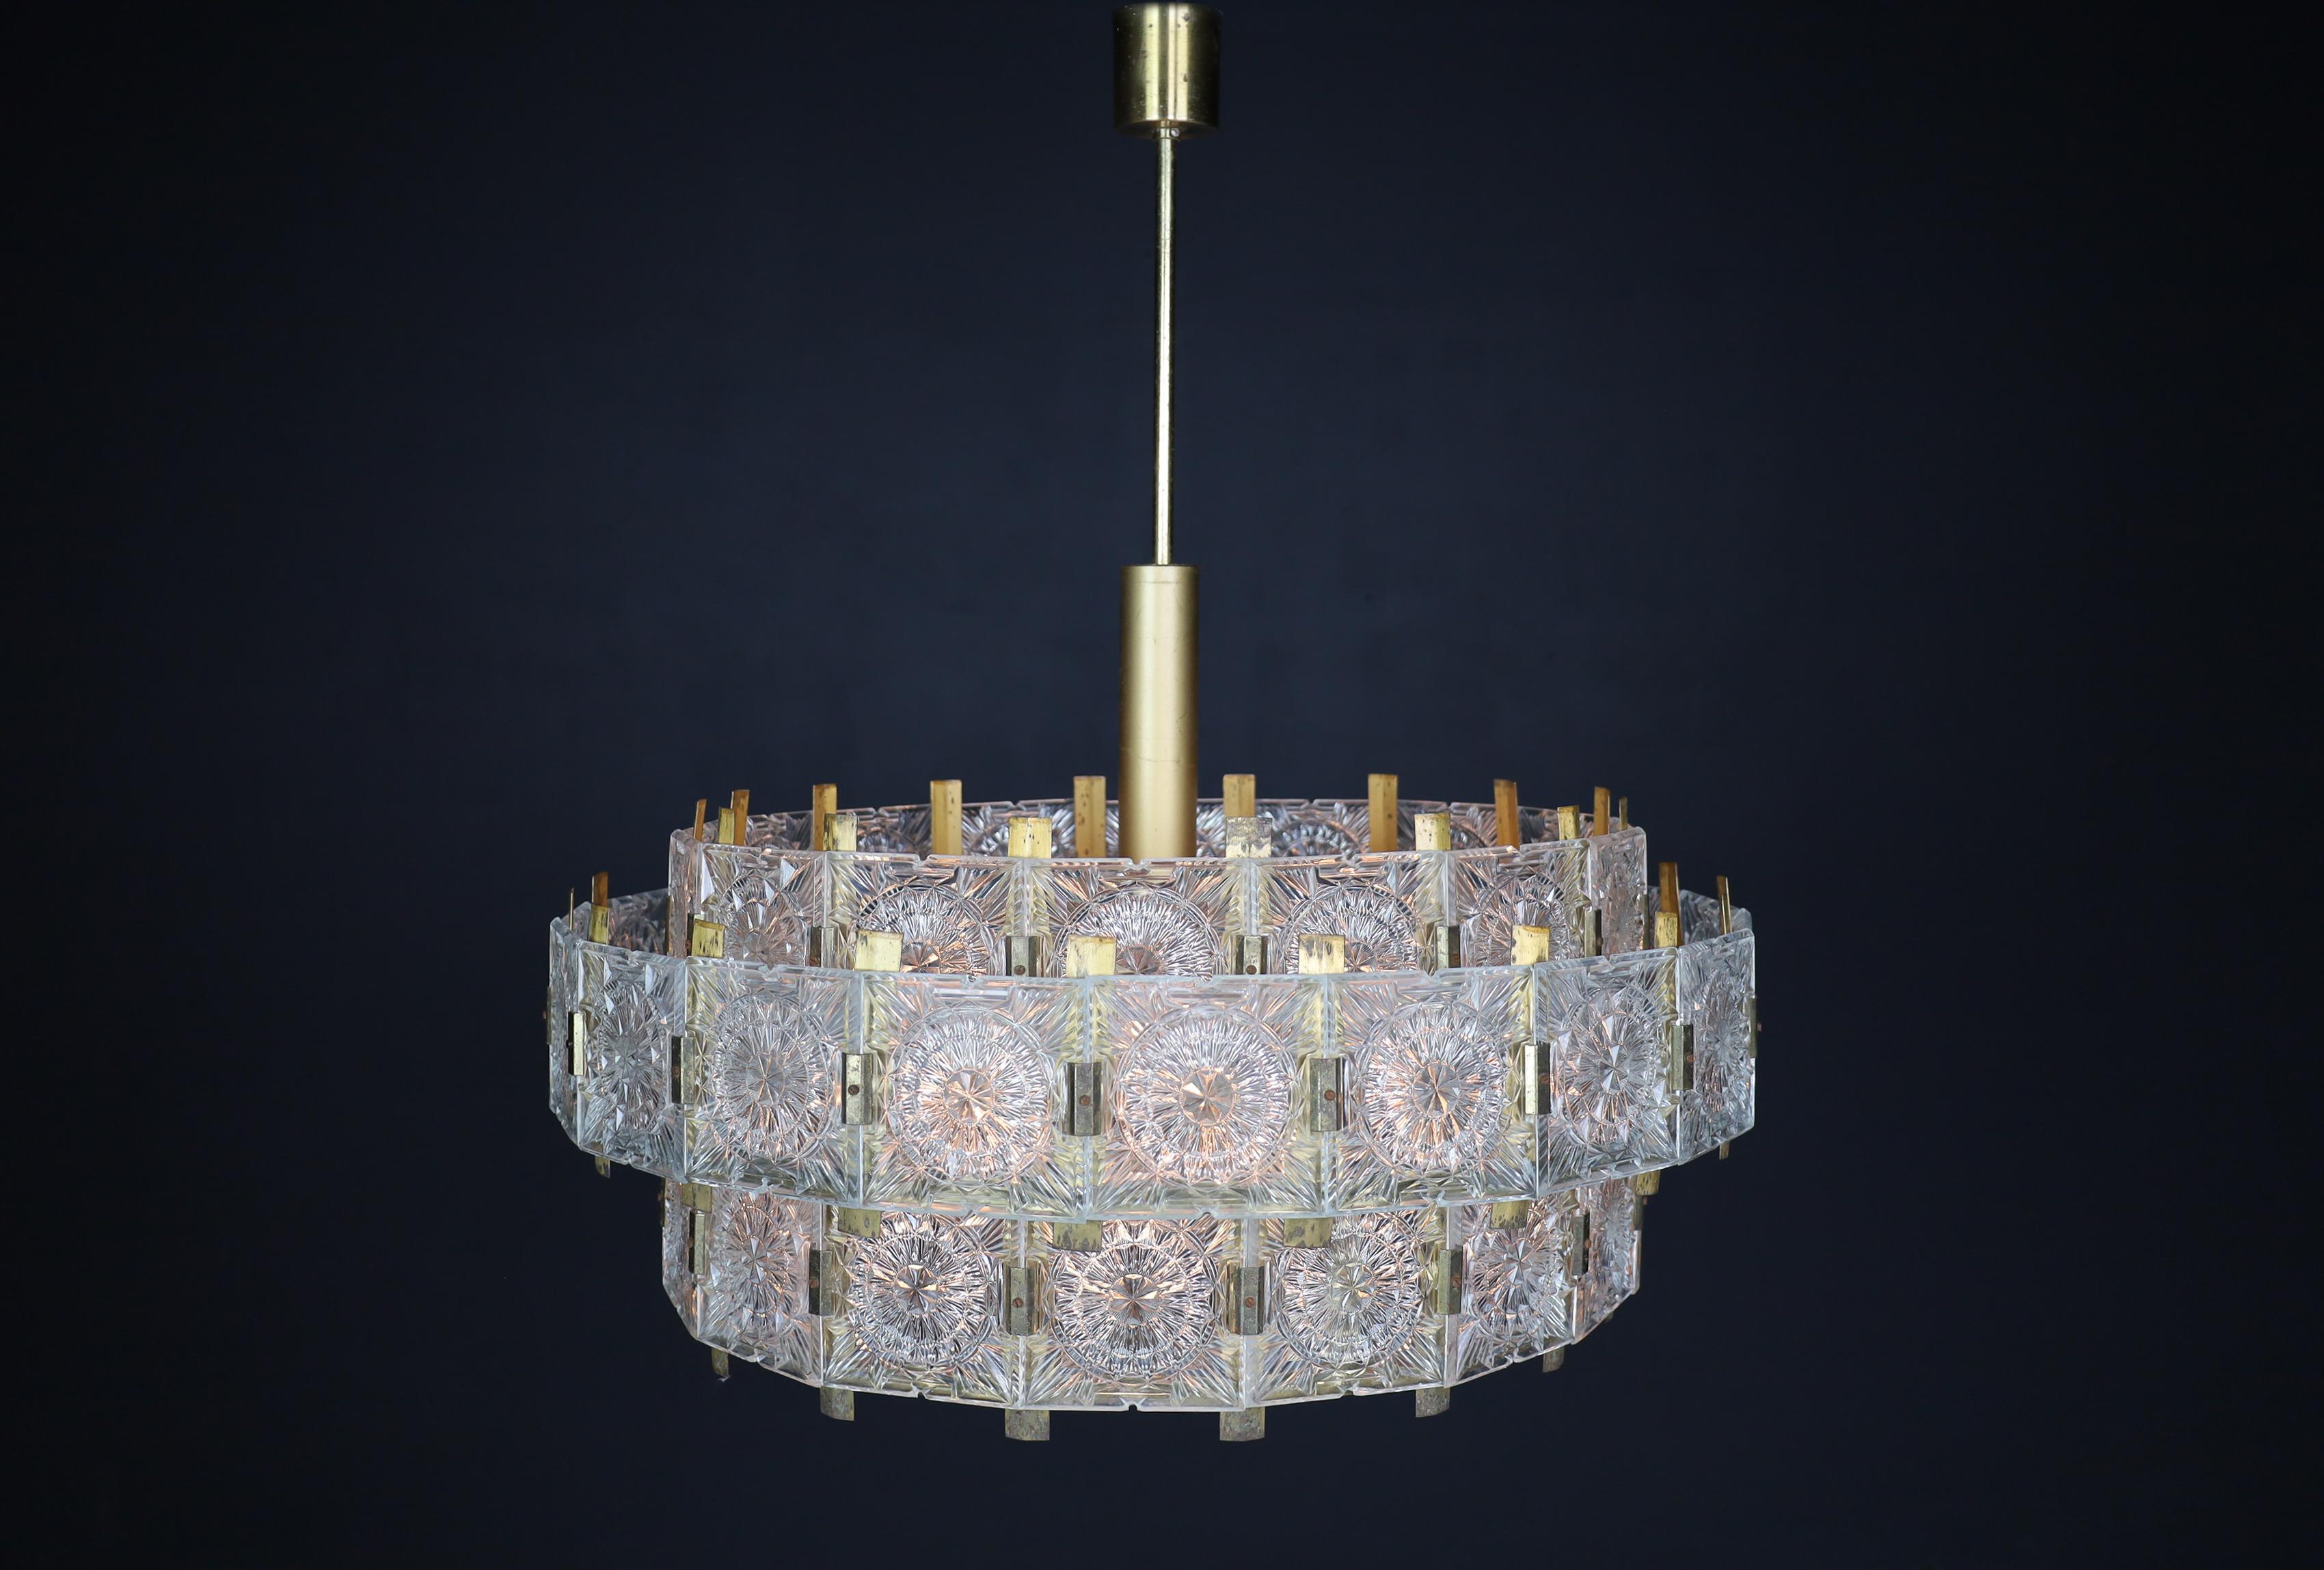 Large Extravagant Chandelier with Patinated Brass Fixture, Praque, 1960s For Sale 1